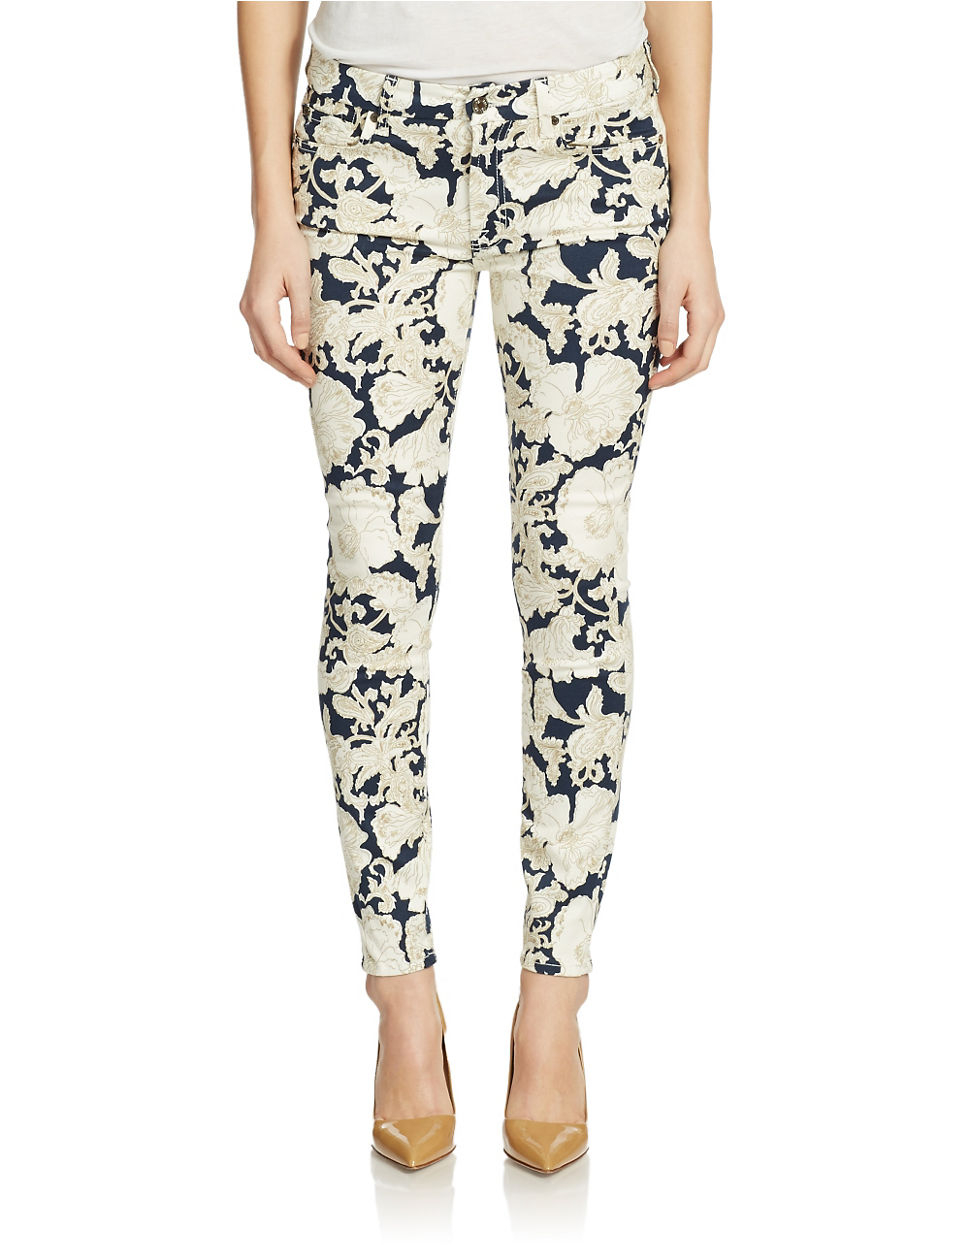 Lyst - 7 For All Mankind Floral-Print Skinny Ankle Jeans in Black